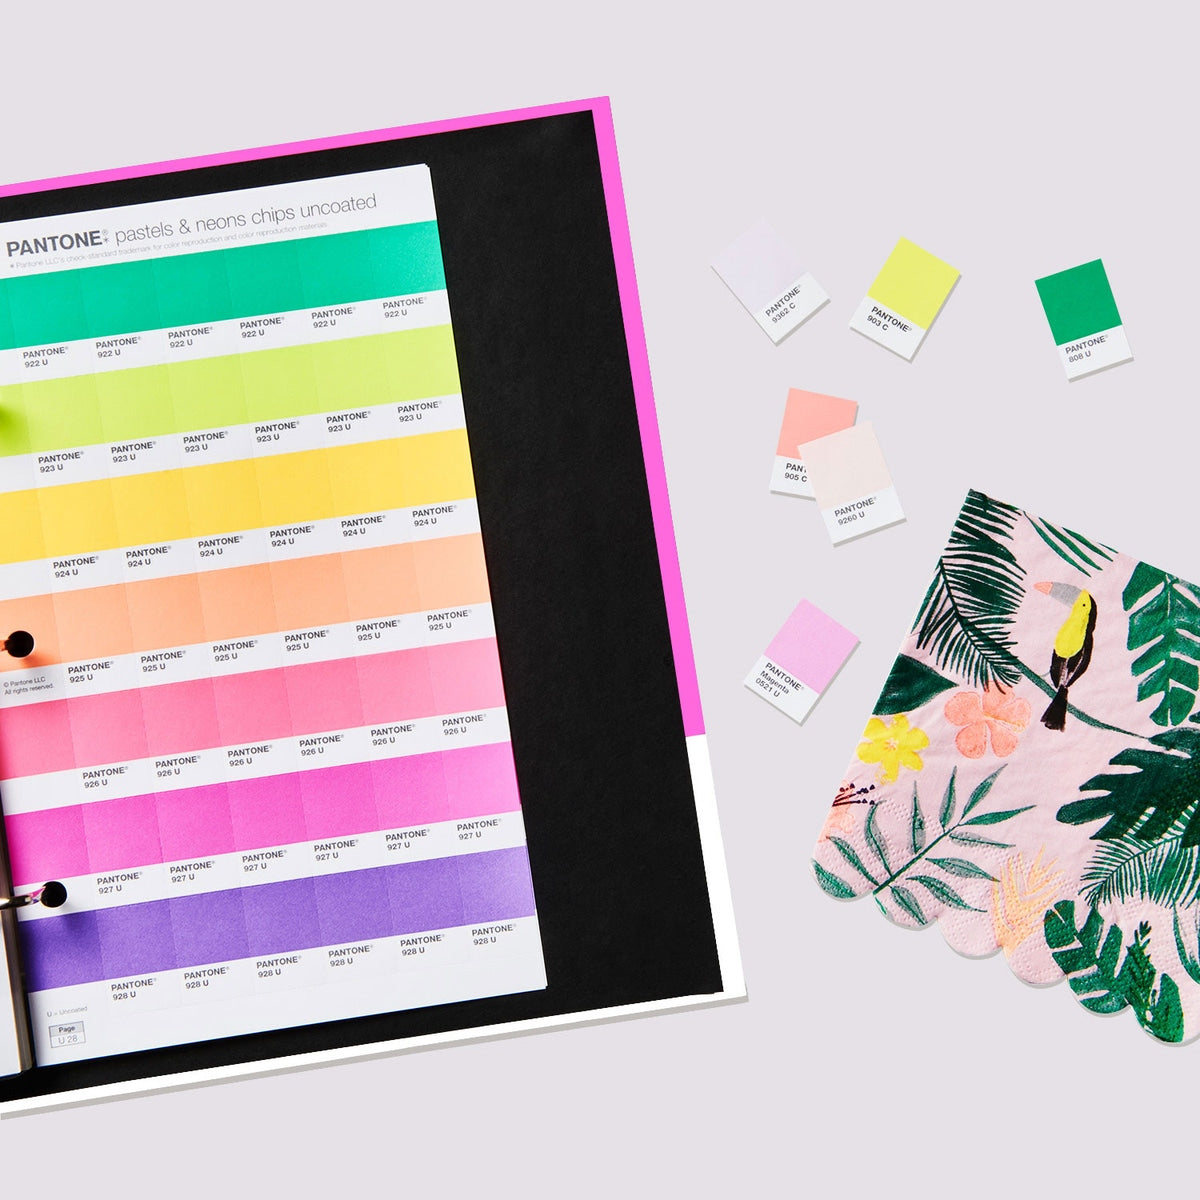 PANTONE PASTELS & NEONS CHIPS | COATED & UNCOATED